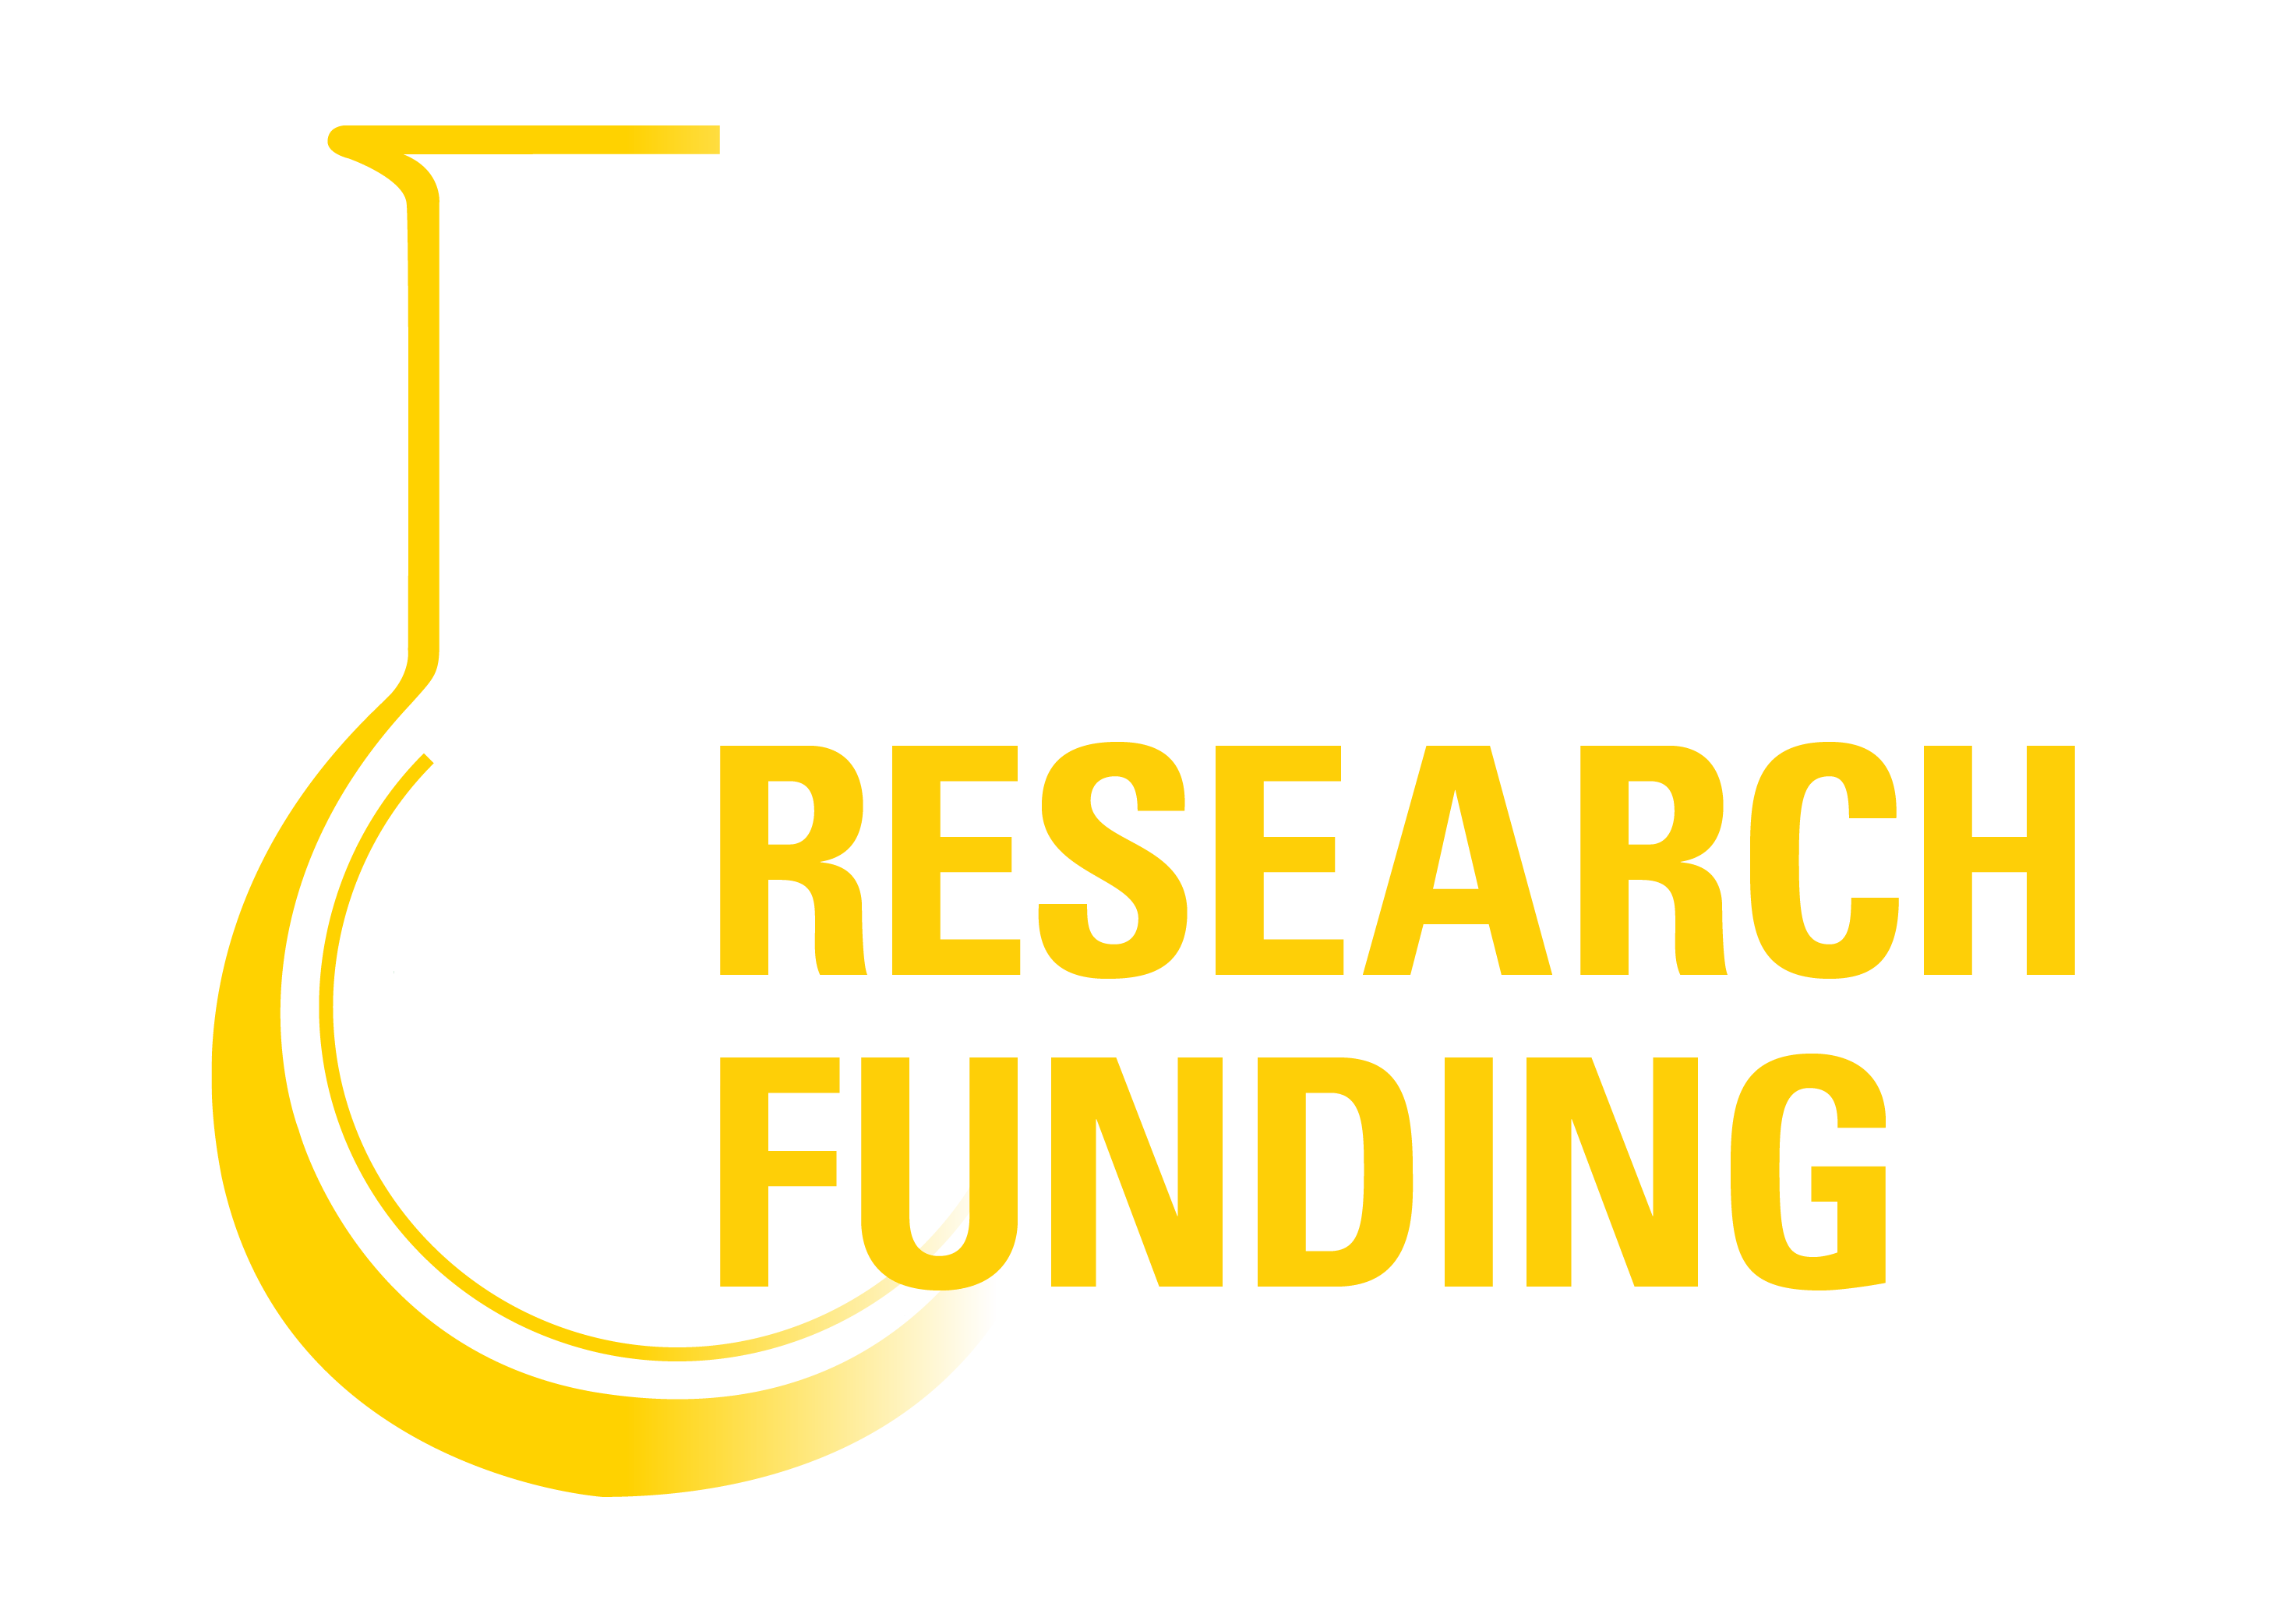 A Top Dental School for Research Funding